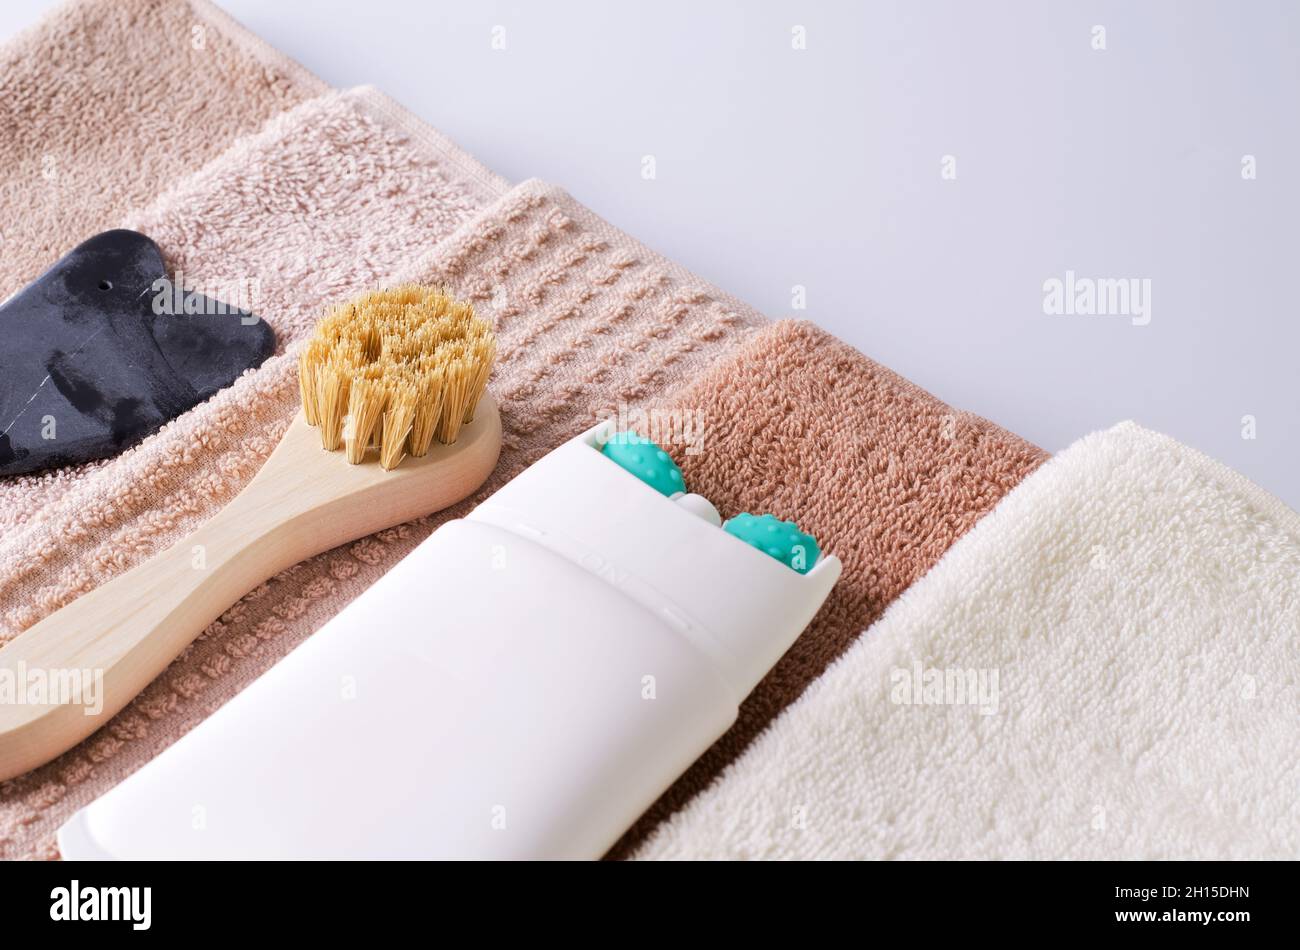 Lifting cream in tube with massage roller nozzle close-up, brush made of natural bristles and gouache made of natural stone for a stack of towels Stock Photo